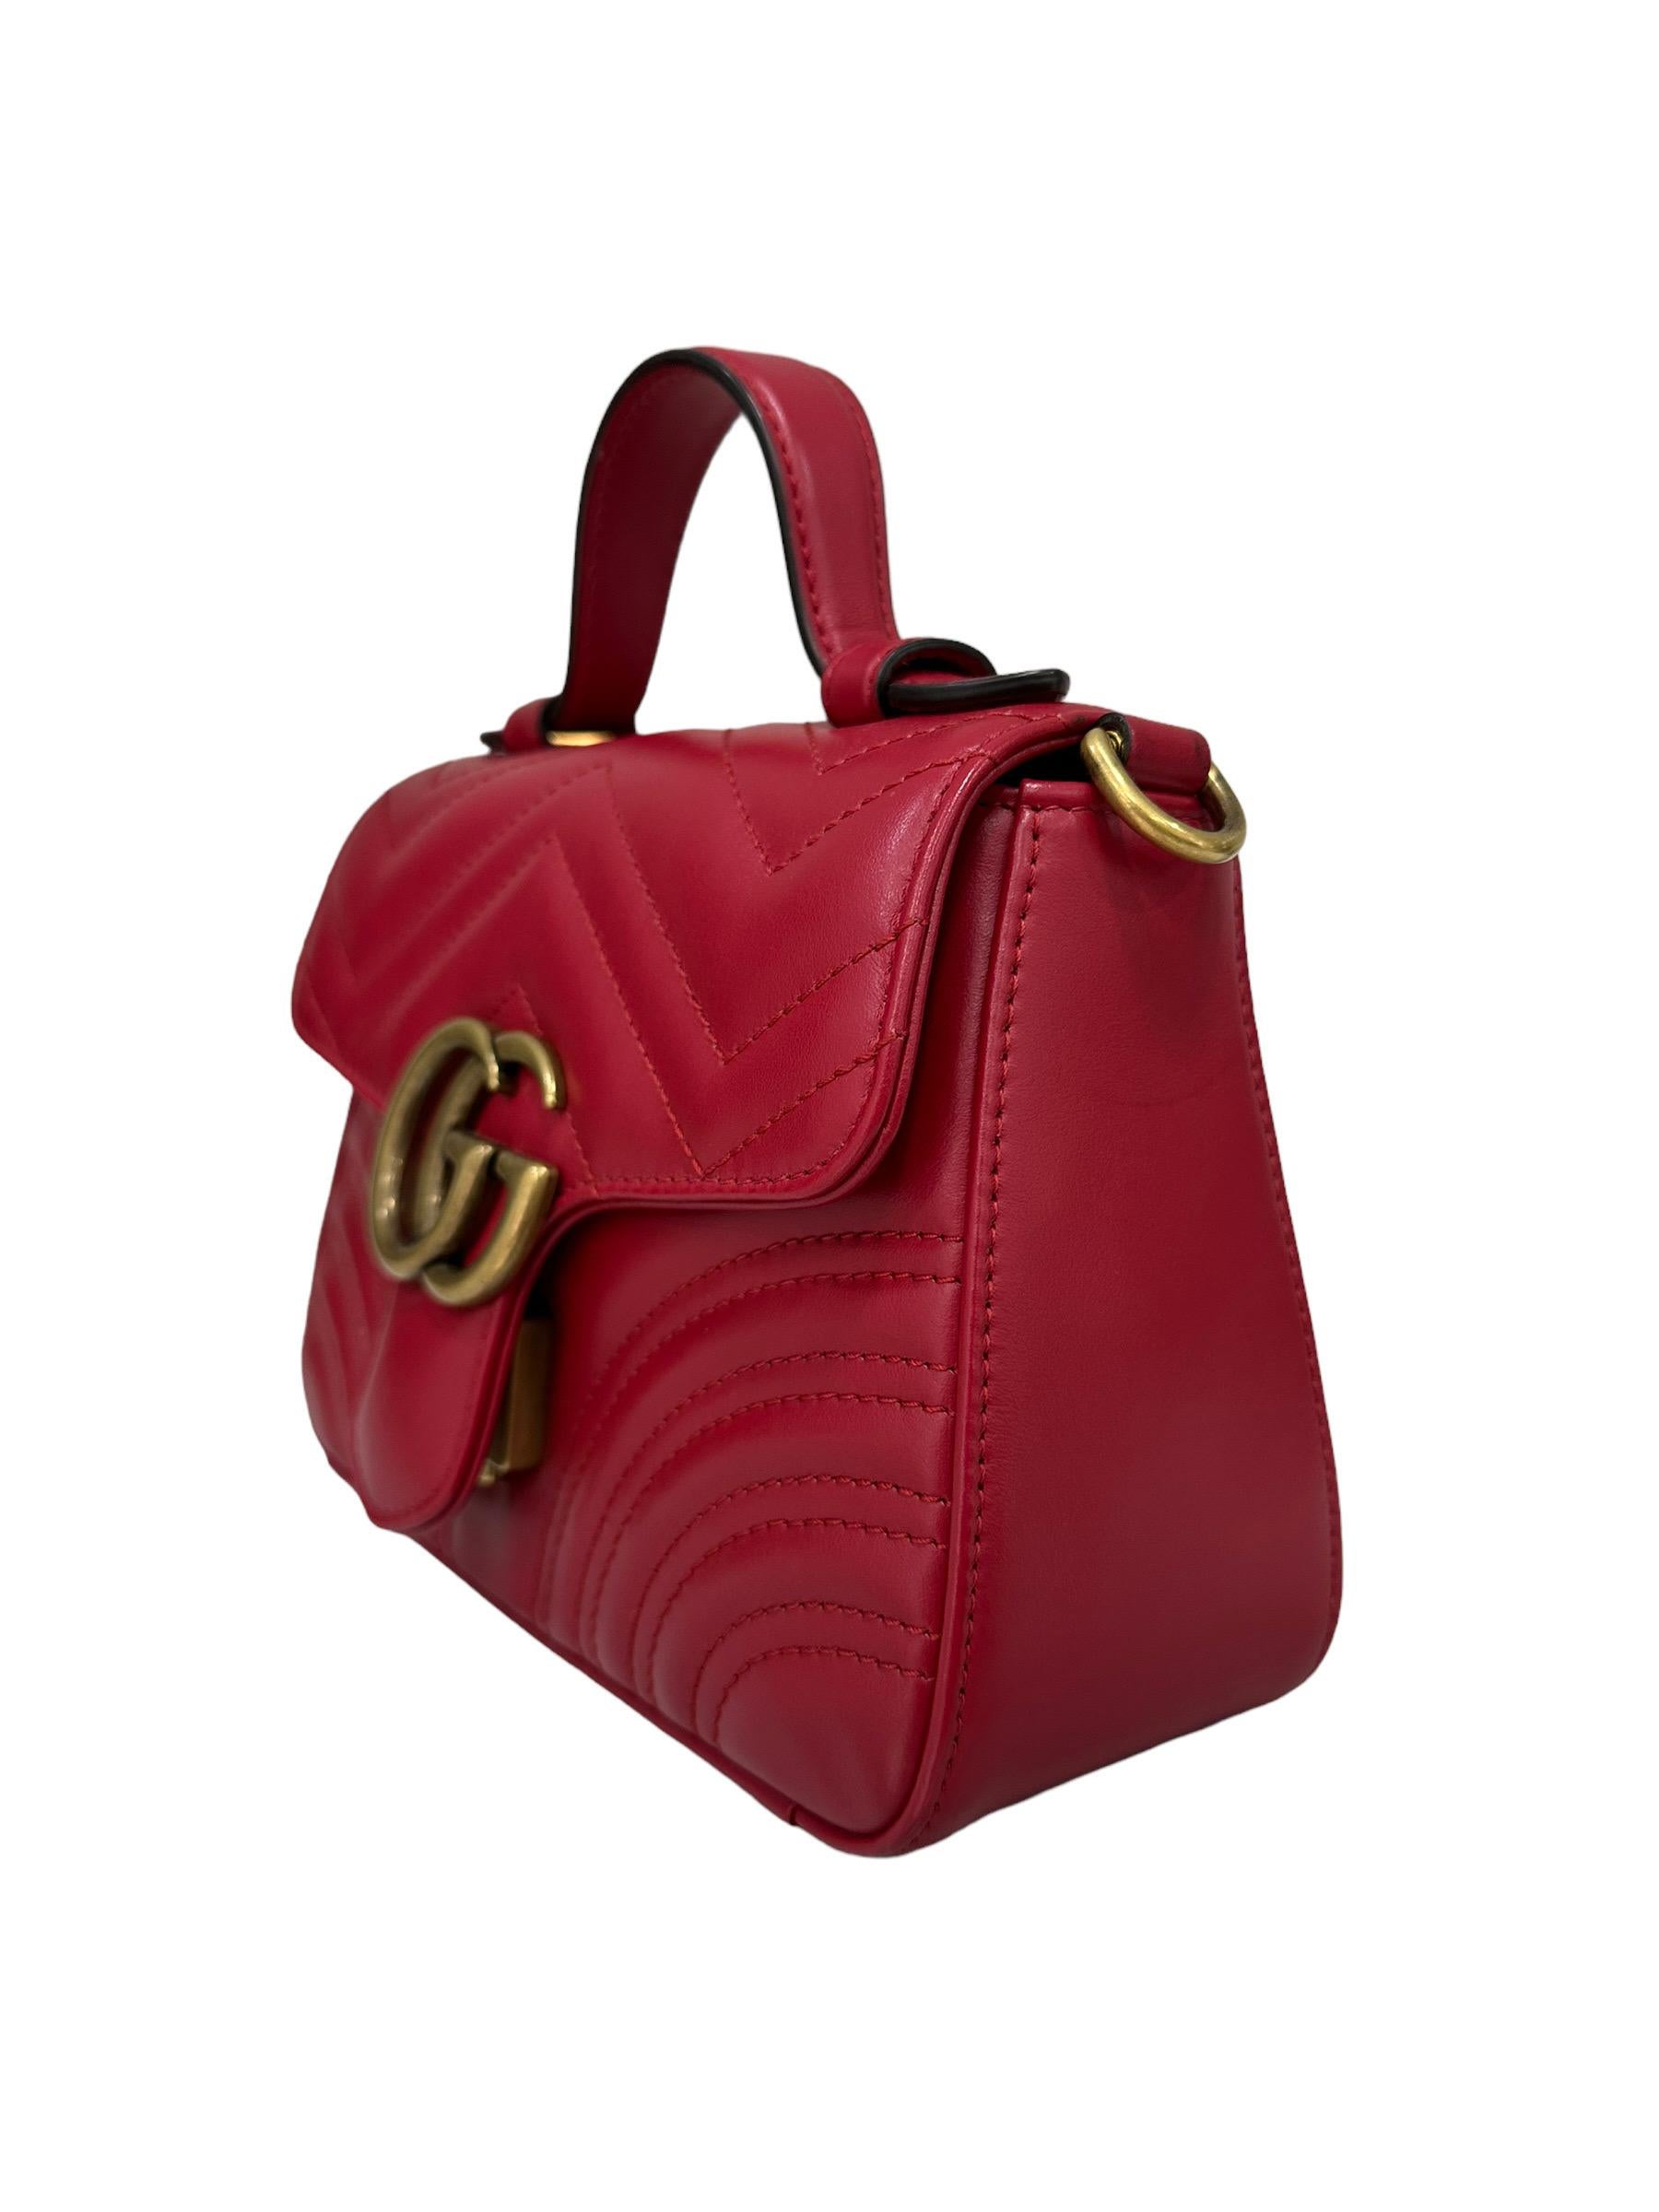 Gucci Marmont 20 Handle Rossa 2